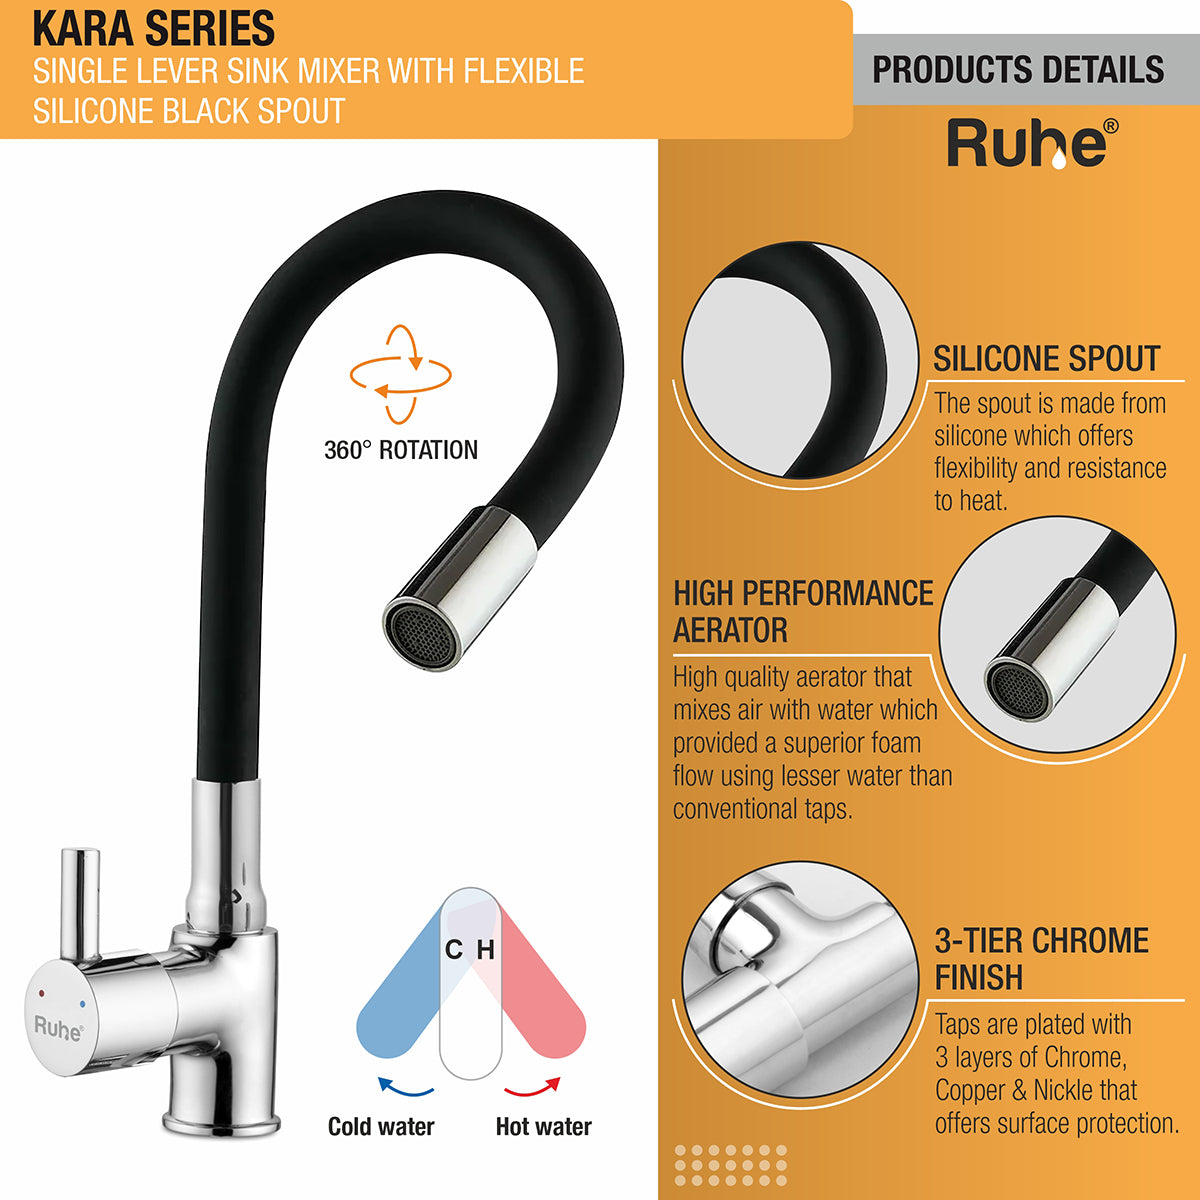 Kara Single Lever Sink Mixer with Silicone Black Flexible Spout product details with silicone spout, high quality aerator, 3 layer protection